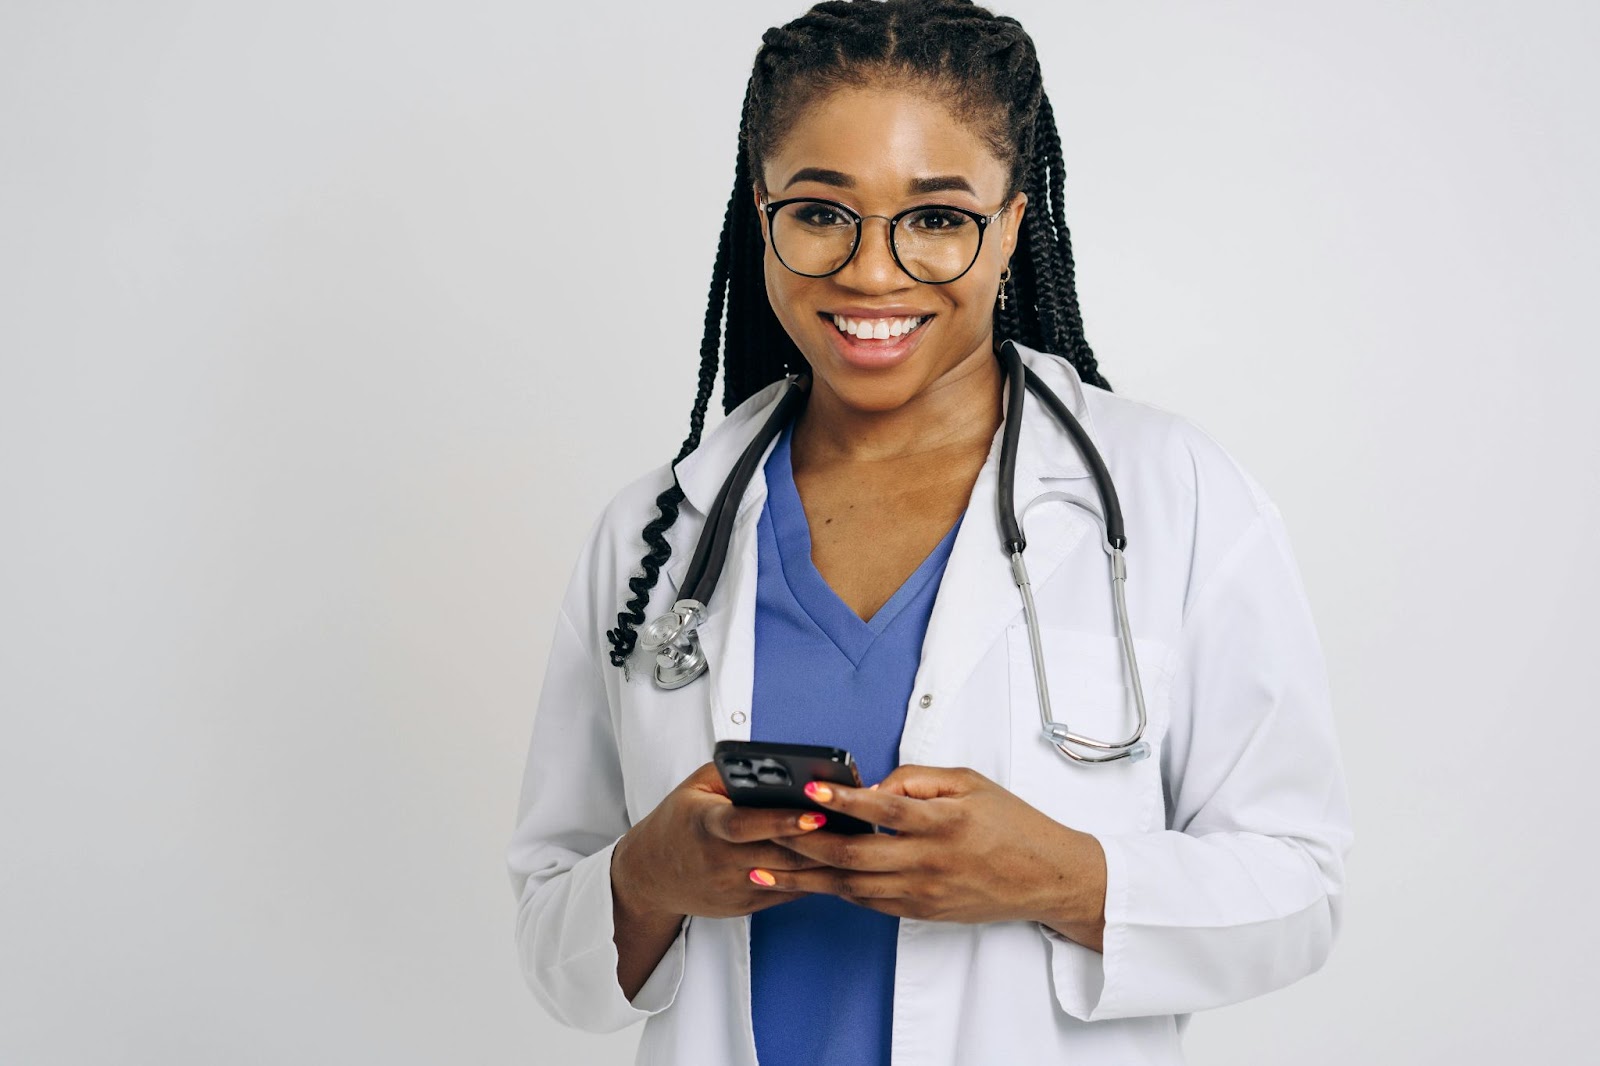 Female doctor smiling while holding a phone